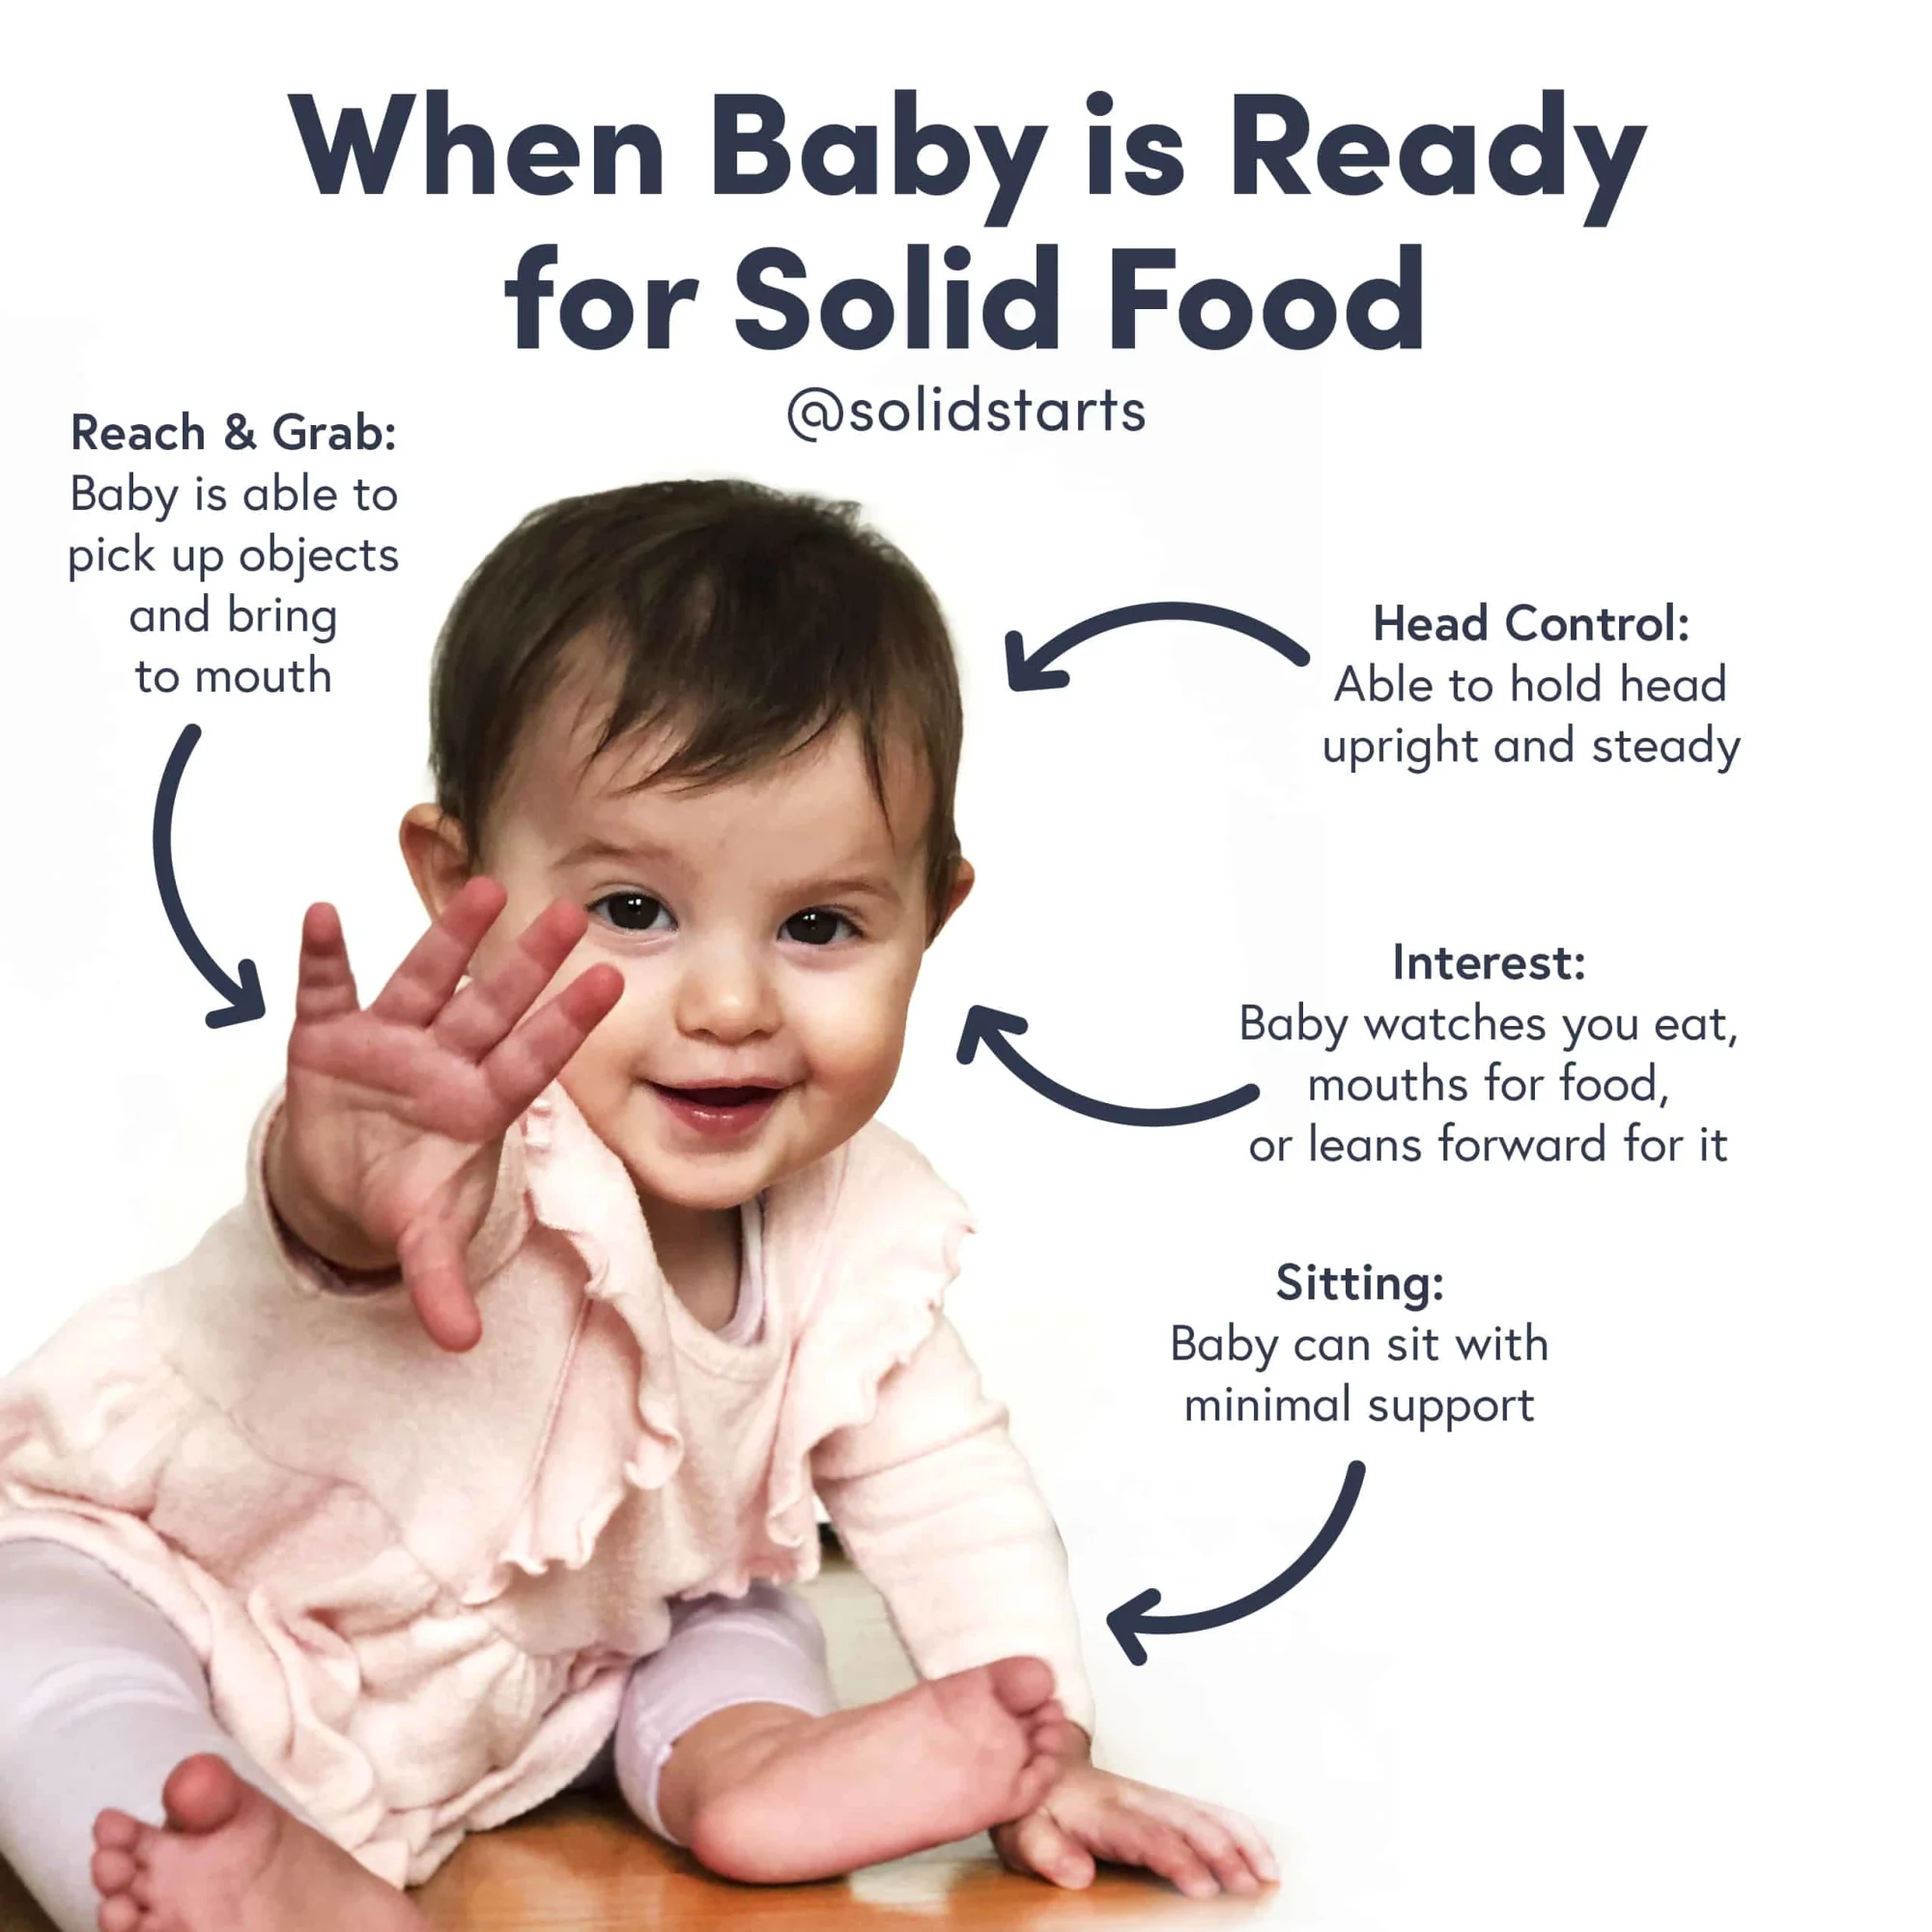 Signs that baby is ready for solid foods, readiness signs for solids